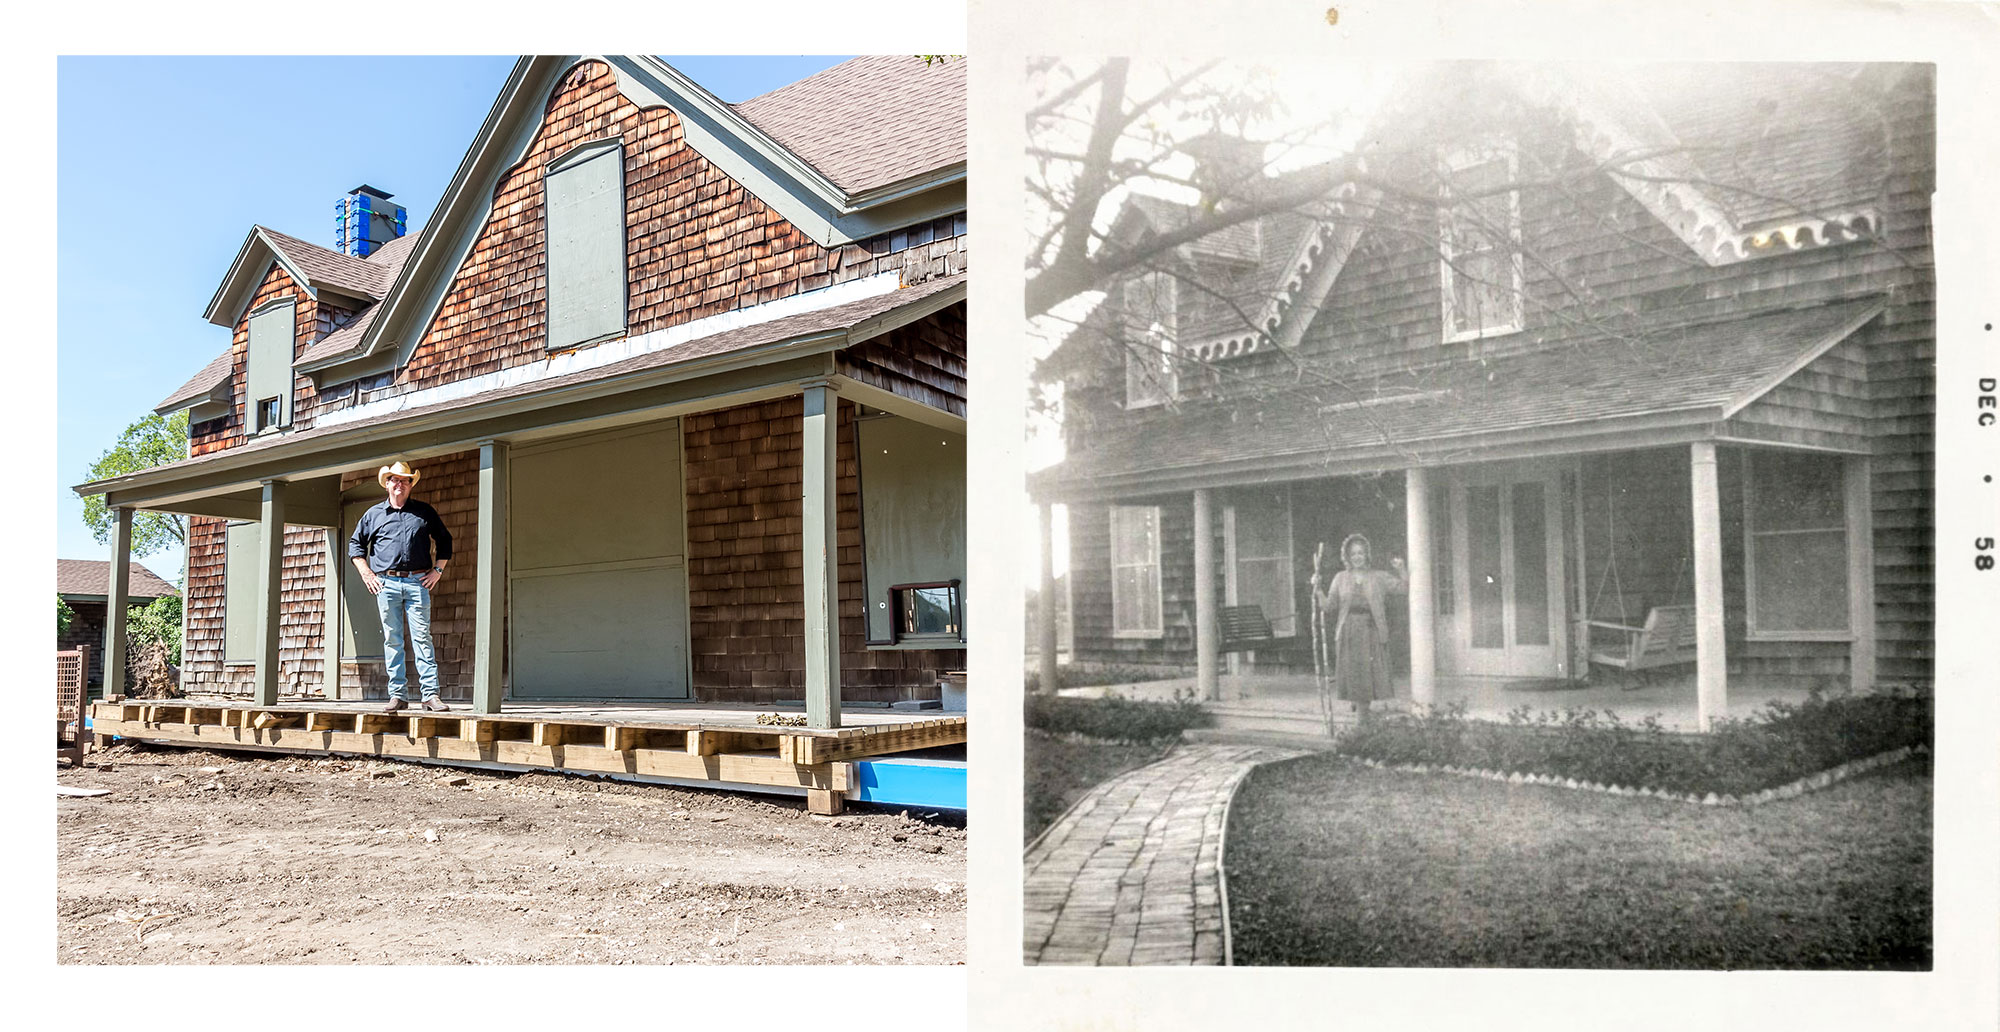 The Collinwood House in 1958 and today // photos by Jennifer Shertzer